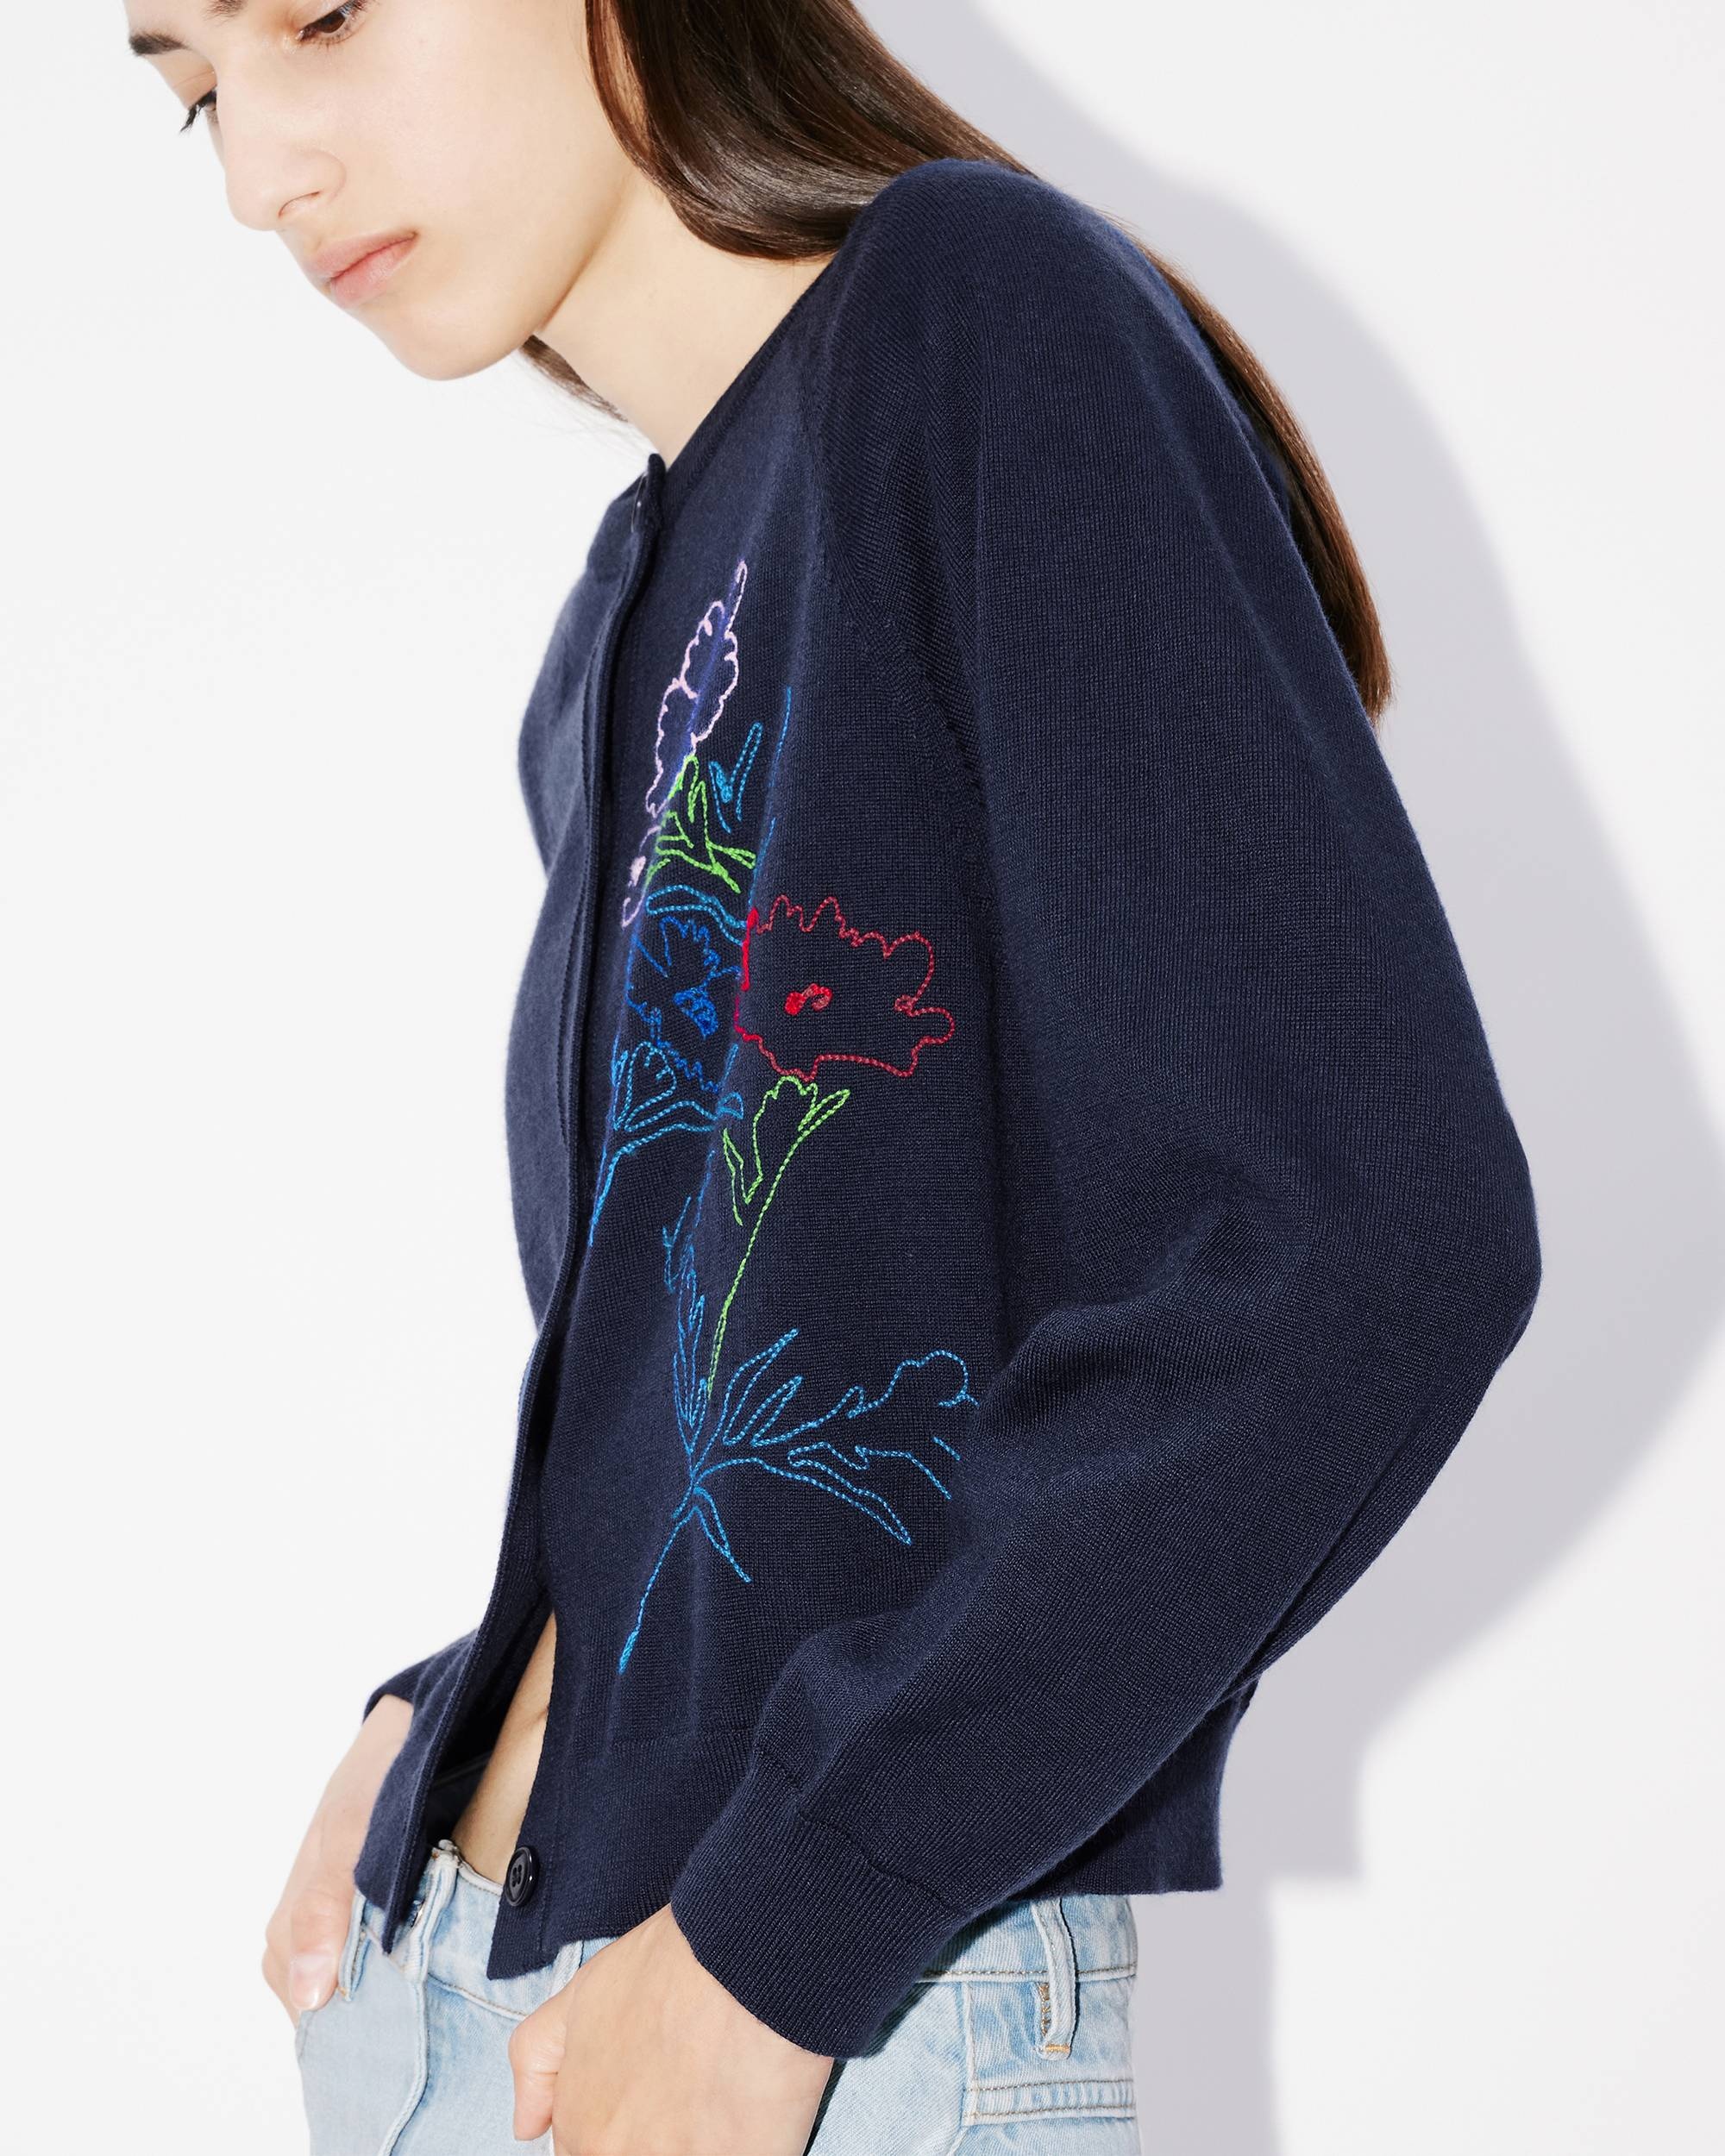 'KENZO Drawn Flowers' embroidered cardigan - 6